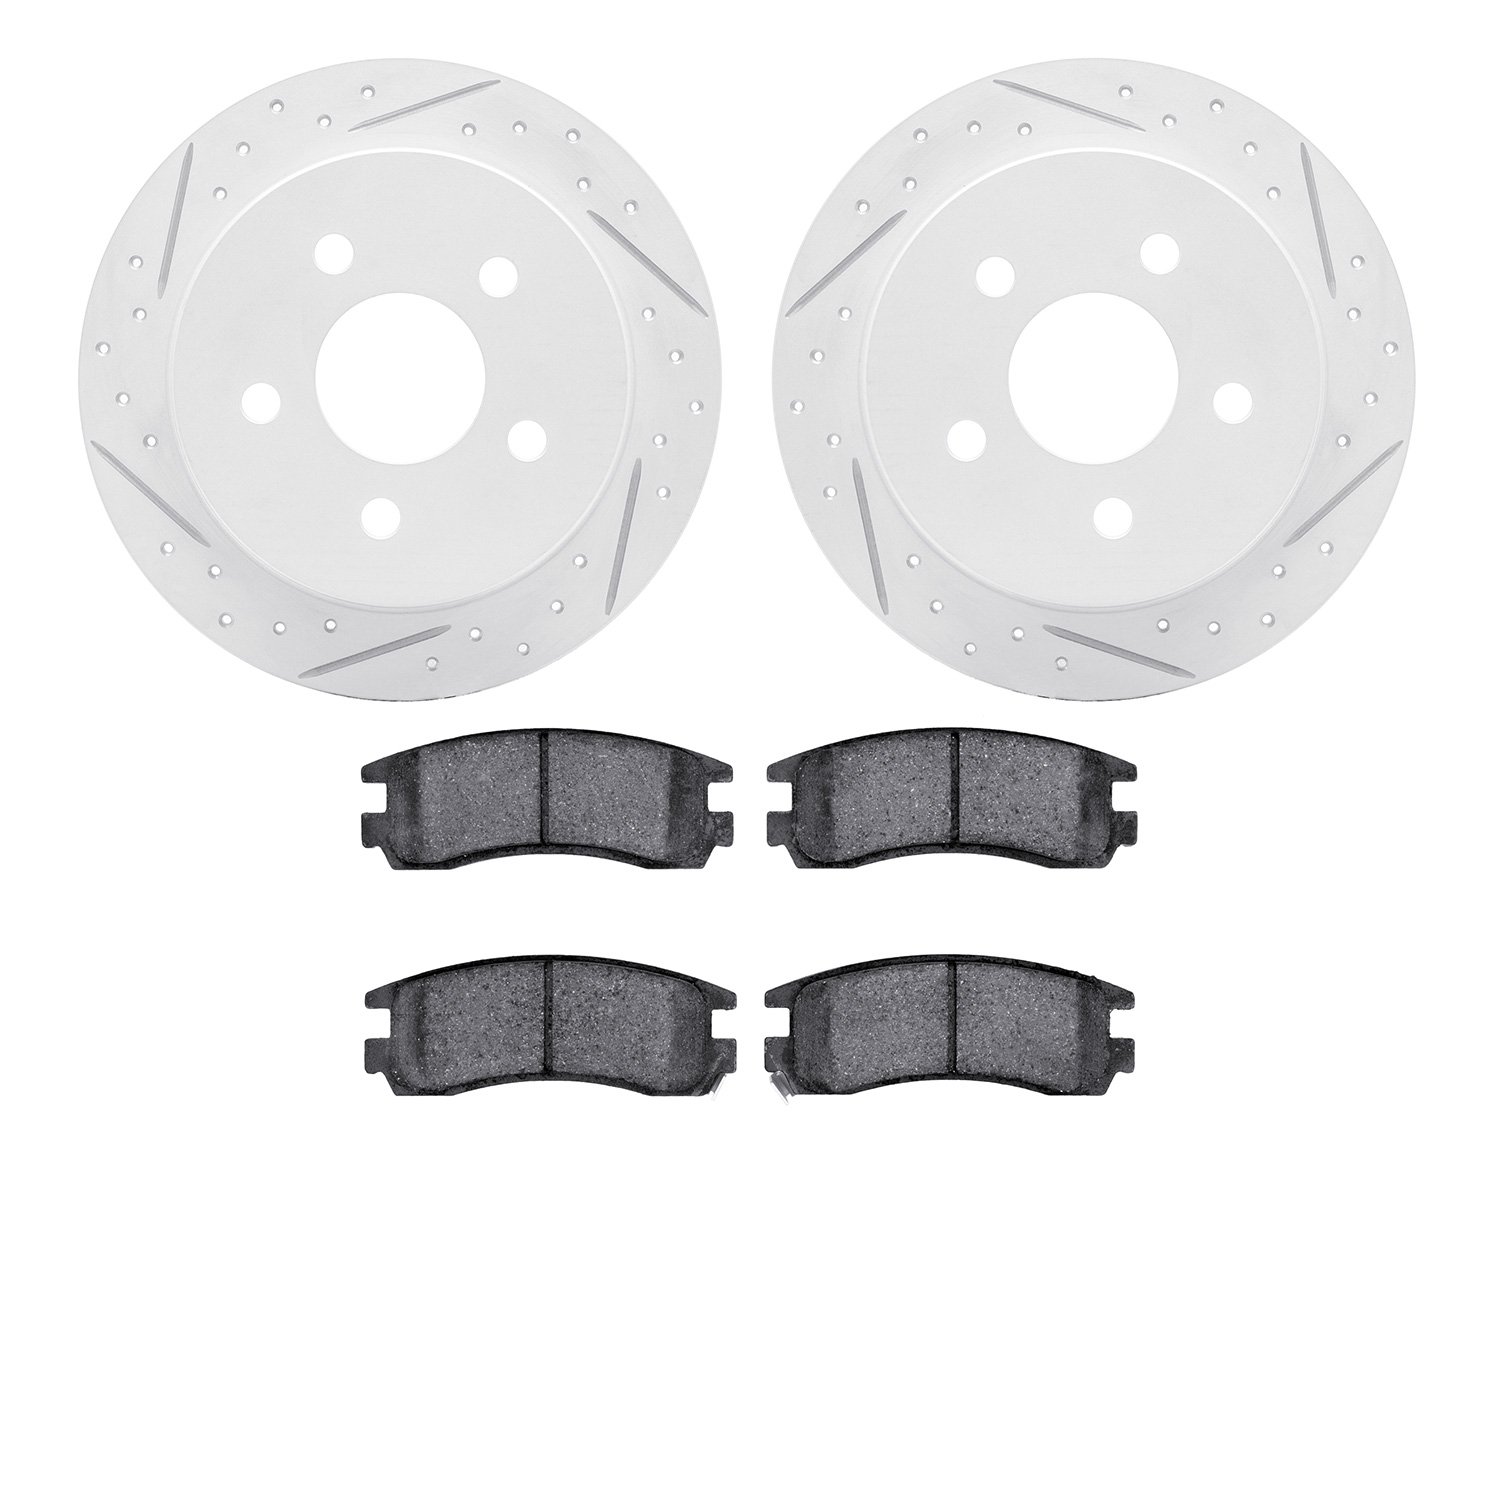 2502-52005 Geoperformance Drilled/Slotted Rotors w/5000 Advanced Brake Pads Kit, 1997-2005 GM, Position: Rear